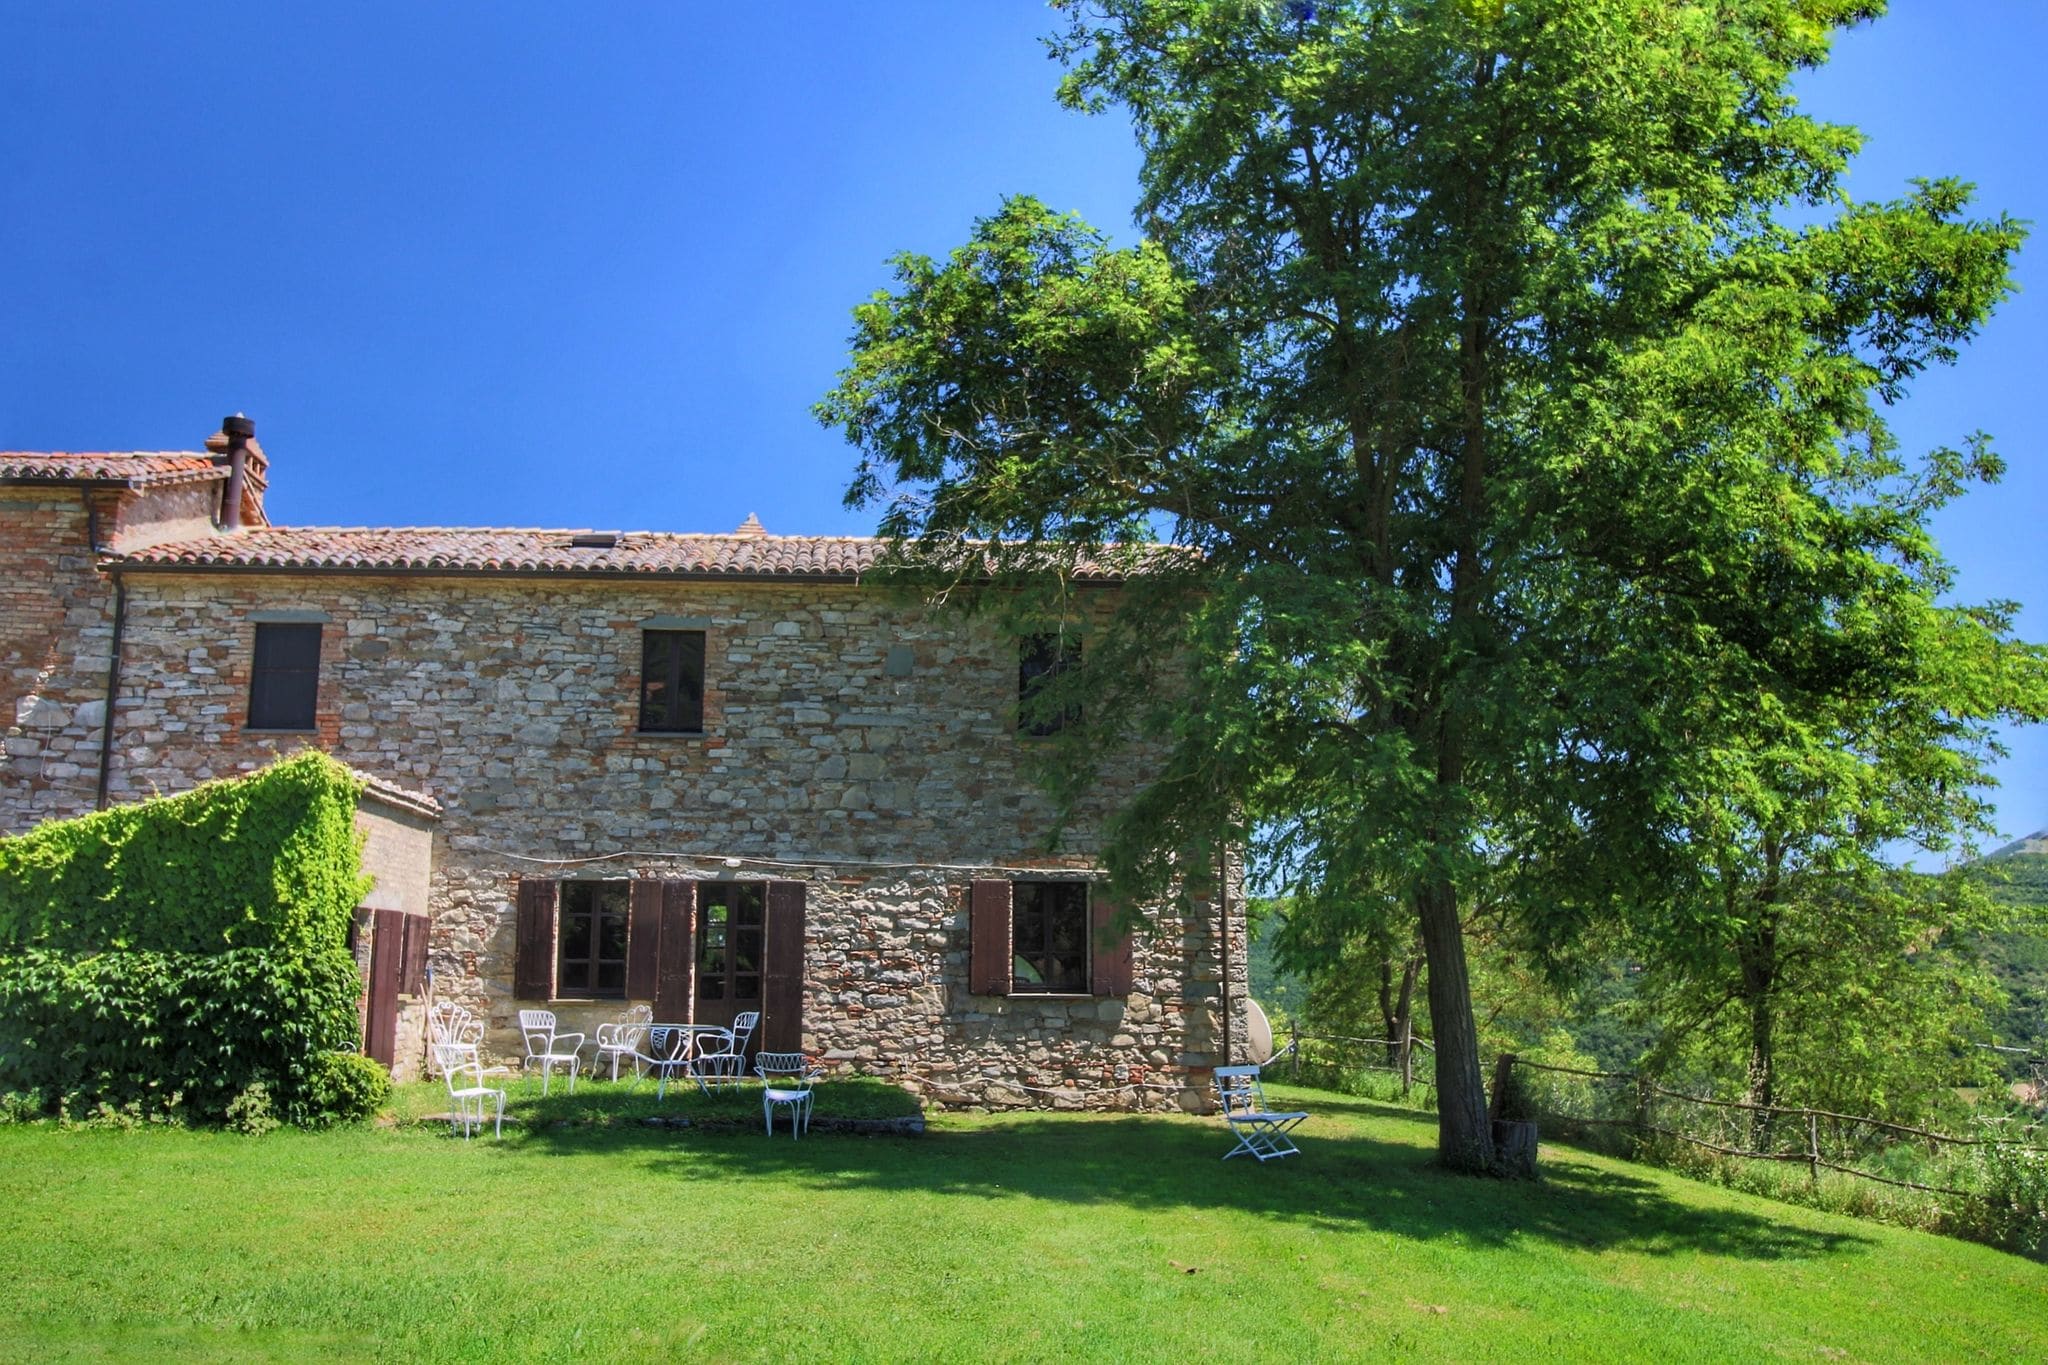 Farmhouse near Centre in Umbertide with Garden and Alpacas